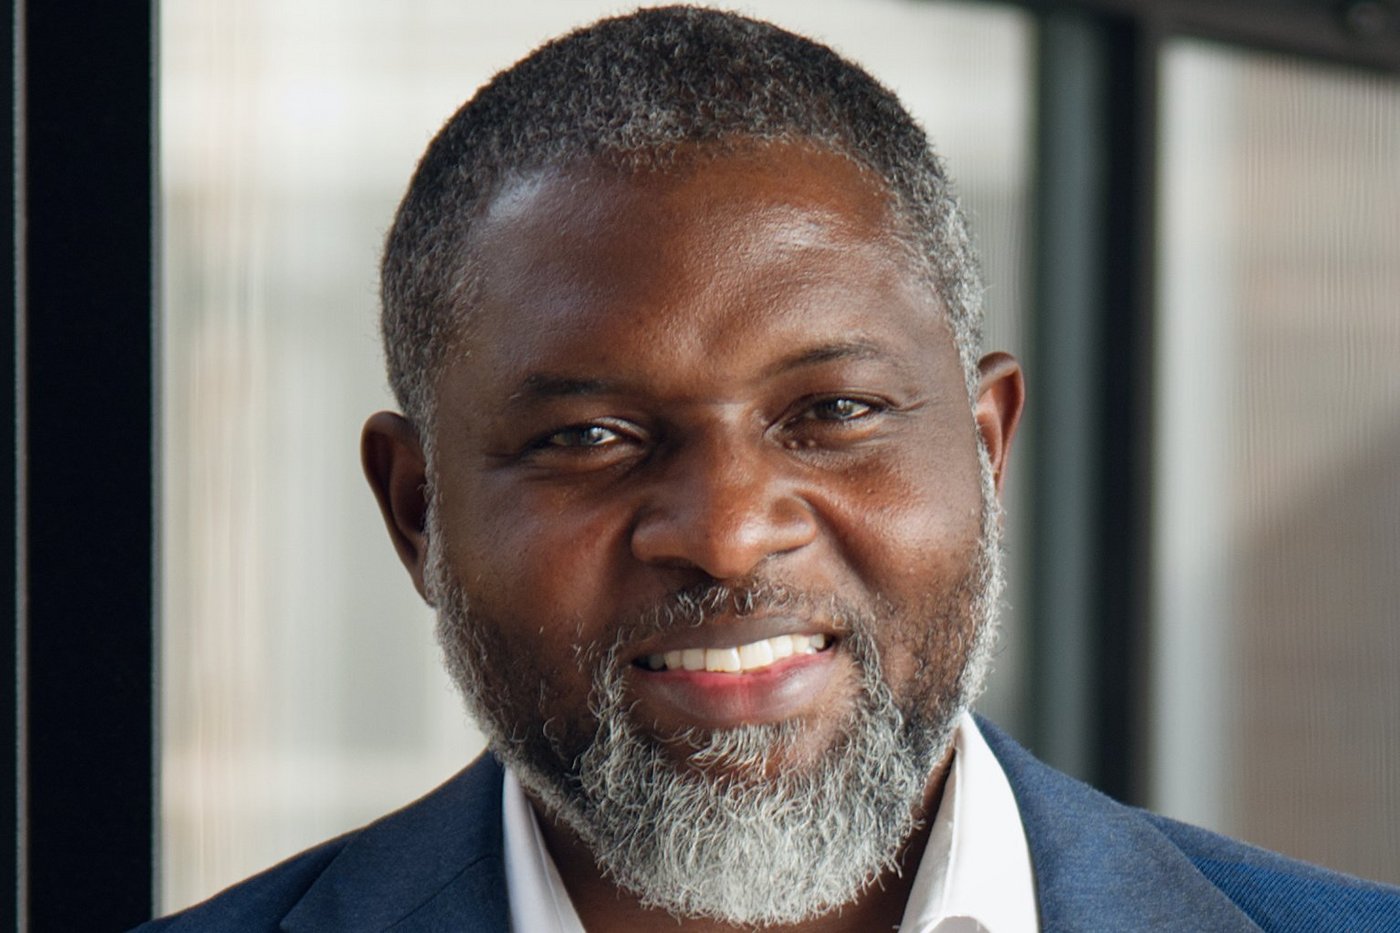 The portrait photo shows the Ghanaian researcher John Amuasi. He wears a slightly greying beard, a white shirt and a blue jacket and smiles at the camera.